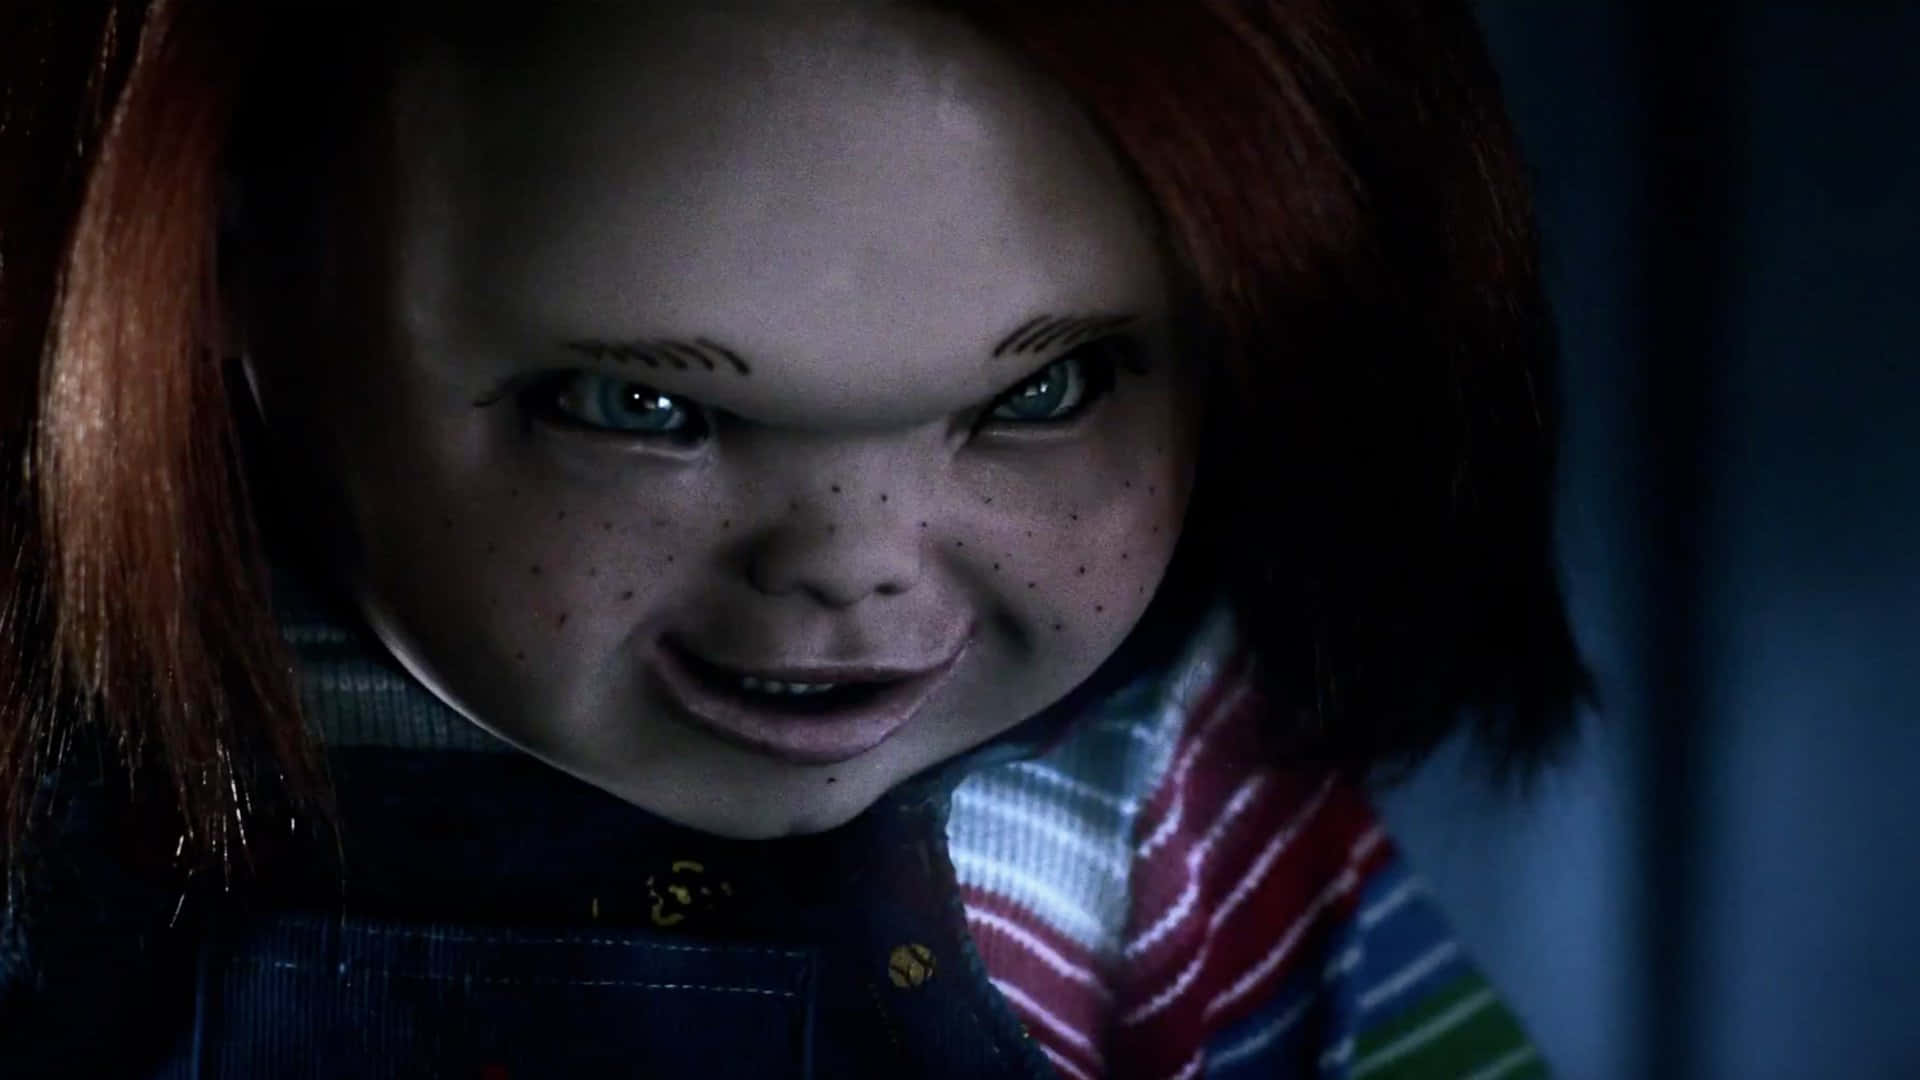 Sinister Smile - Iconic Chucky Doll